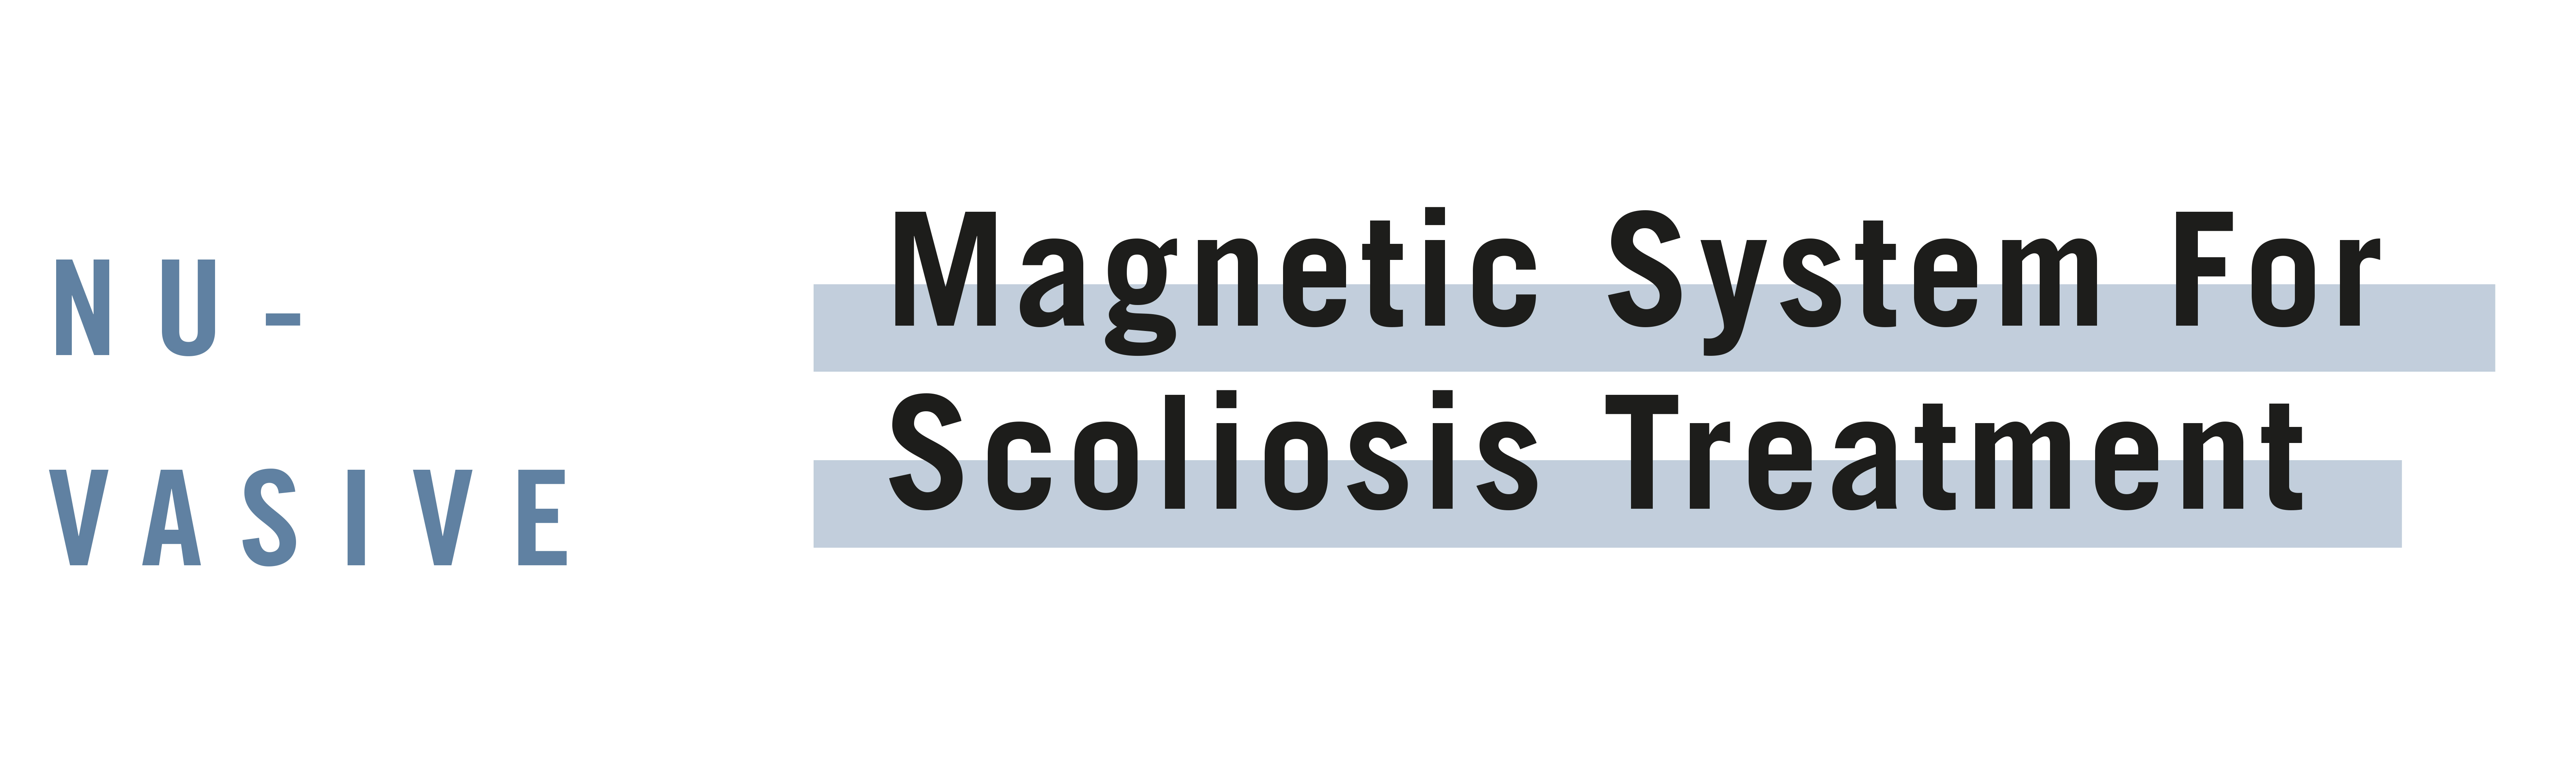 Magnetic System For Scoliosis Treatment